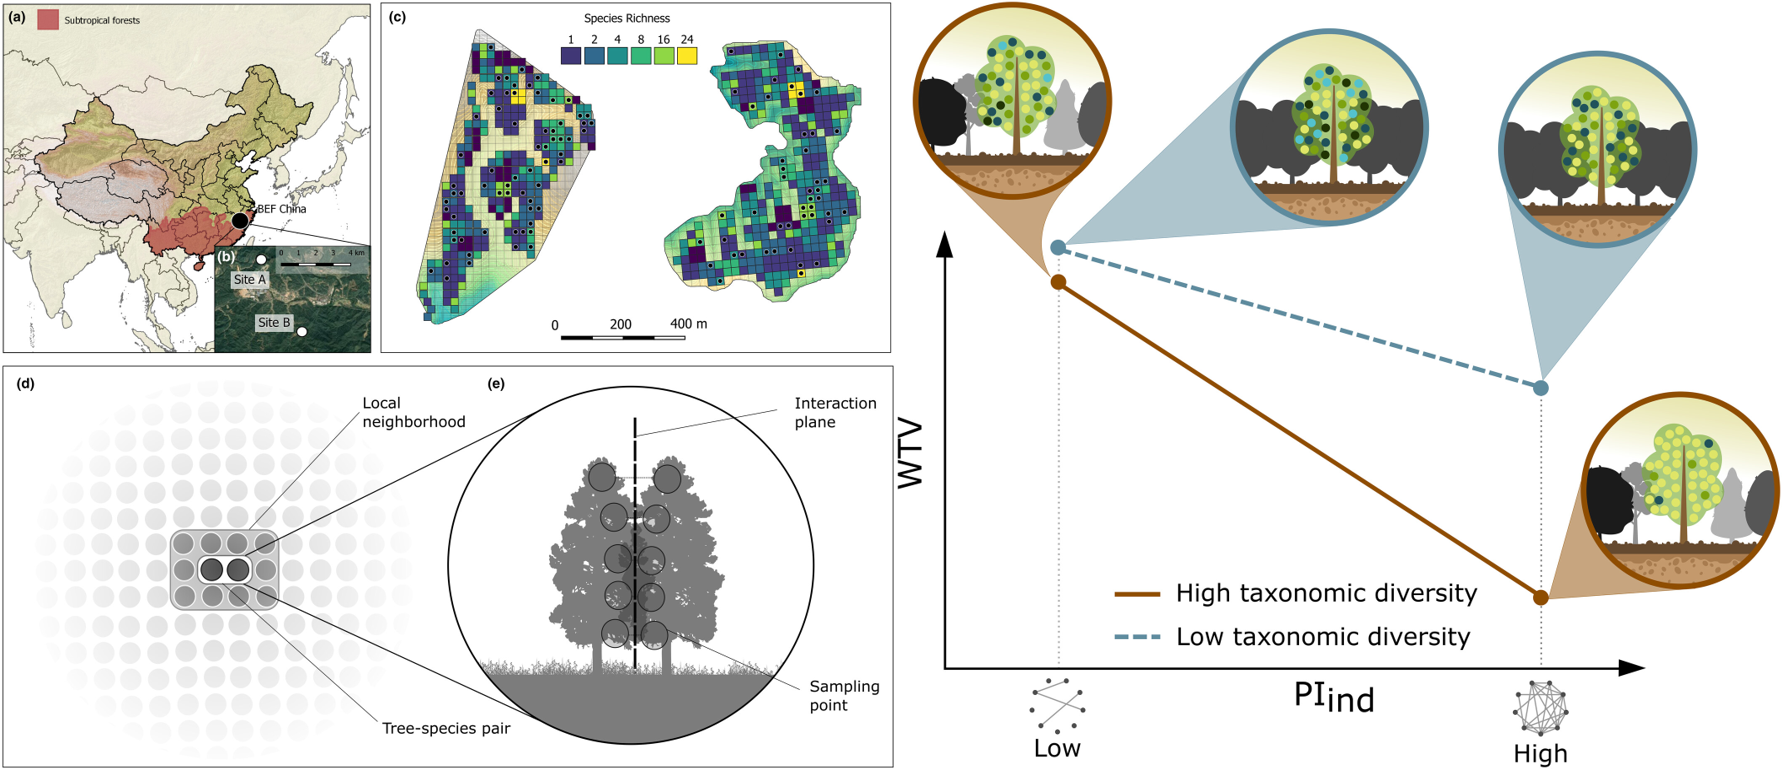 Within-individual leaf trait variation increases with phenotypic integration in a subtropical tree diversity experiment